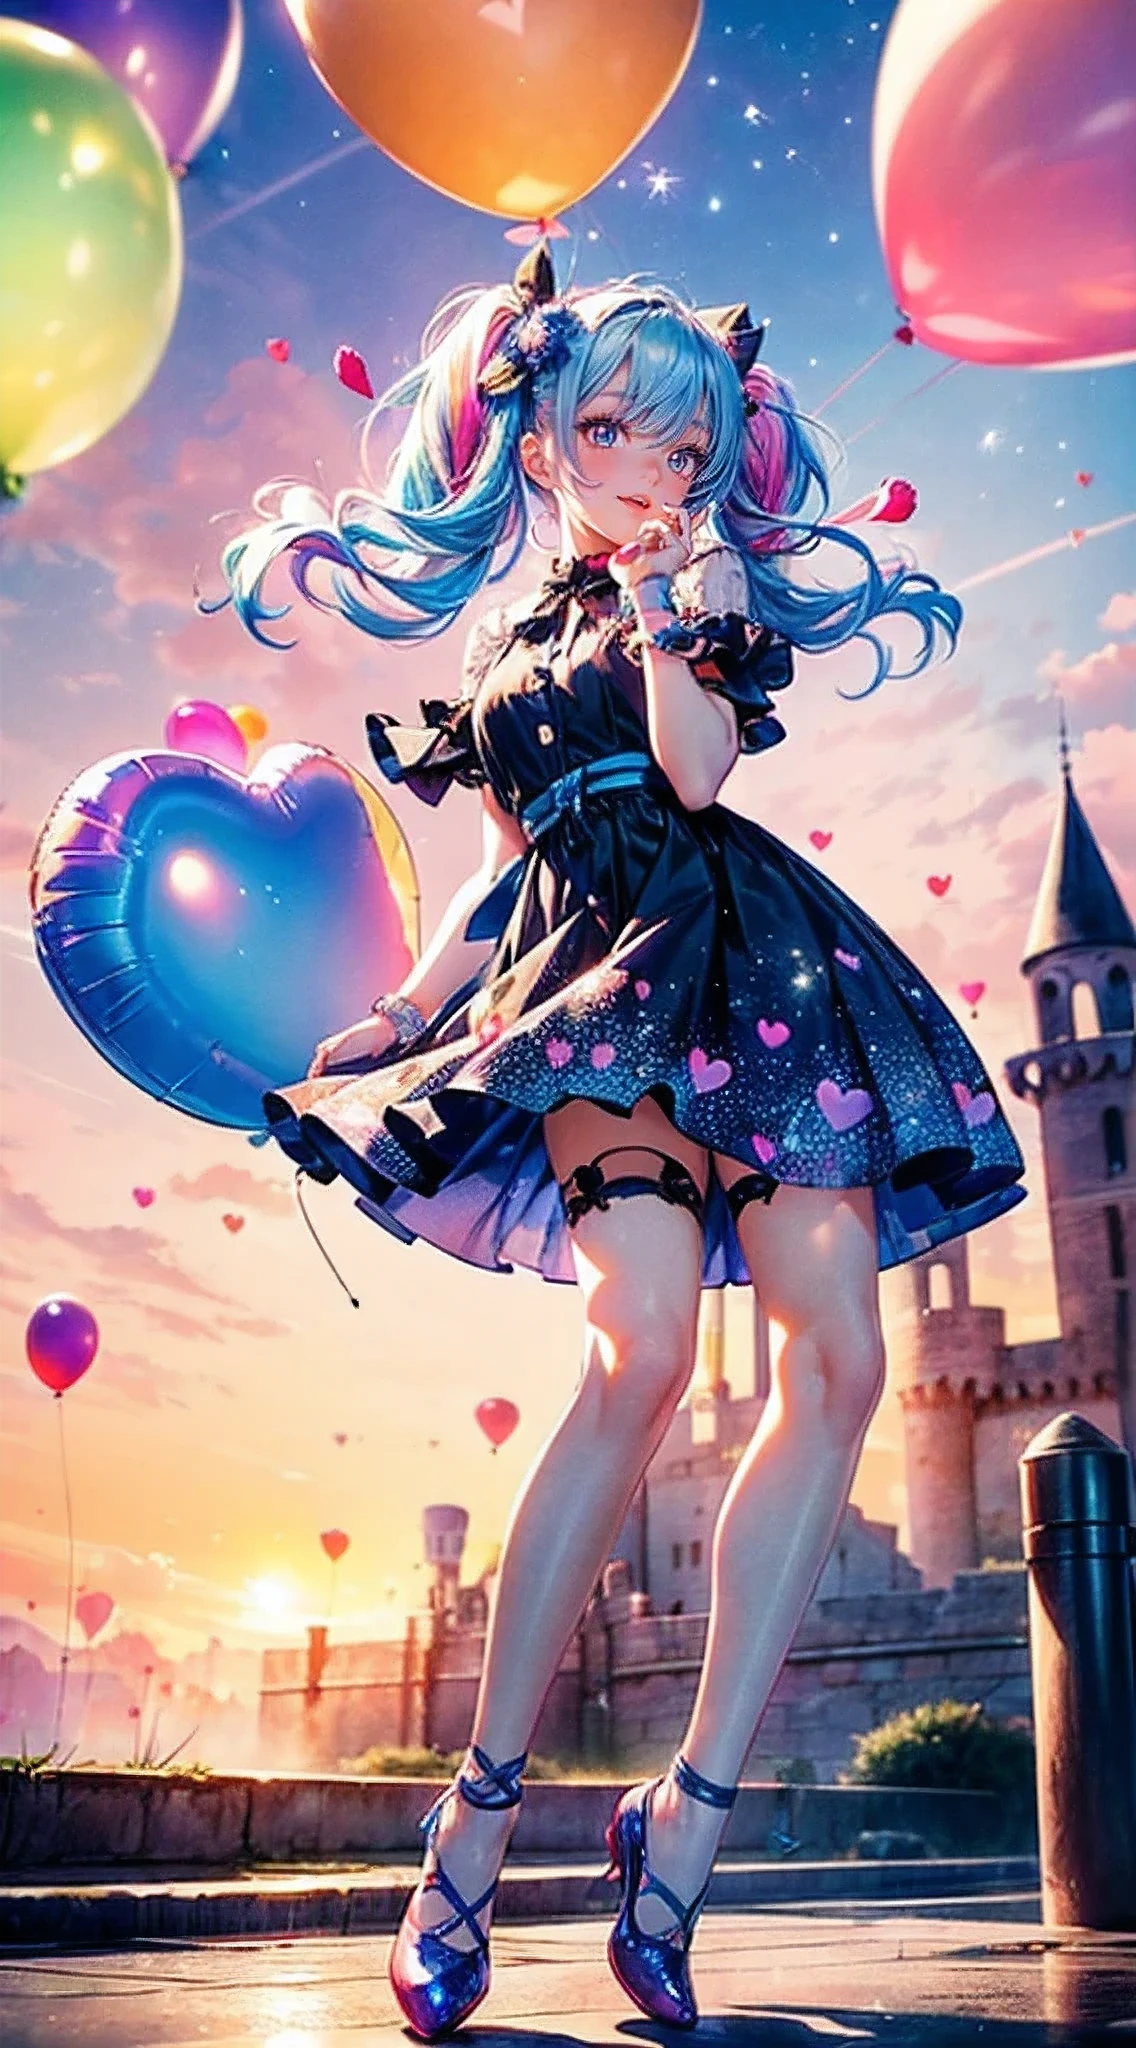 (fullllbody, legs and shoes visible: 1.2)) Expressive eyes, Woman, pale skin, Long hair, wind blown hair, ((absurdly Long hair)), long sidelocks, Princess bangs, Hair fringe, Hair bun, ((very long twintails)), Iridescent hair, Light pink hair, Blushing, full face Blushing, big sparkling Pastel purple eyes, (Gradient Eyes), Smile with open mouth, Cute pose, ((holding balloons : 1.3)) 
((Cute and pastel fashion)) ((🌞🥳😃🌹🌷🌳 theme : 1.4)) Flowing pastel dresses, ((Dreamy multicolored open dresses)), (floating ribbon), Lavender ruffles, Pink ruffles, (Light blue lace), Detached short sleeves, Puffy skirt, ((Rainbow and star printed skirt : 1.3)), Lolita skirt, Purple bow, ((Pom Pom Ribbon Hair Ornament : 1.4)), Multiple bows, Striped Lace Stockings, (Heart-shaped leg garter), Cute (Pastel purple) shoes ((Highly detailed clothes and fashion)) looking at you, Vintage Girl, Blushing, (Beautiful detailed eyes), (the Extremely Detailed CG Unity 8K Wallpapers) (Best Shadow), ((extremely delicate and beautiful)), (Detailed light), ((depth of fields)) Big head, Big sparkling eyes, Moe, Splash Art, Cinematic lighting, Frontal view, volumetric lighting maximalism photo illustration 64k resolution high resolution intricately detailed complex keys visuals precise linear 
((Dreamy pastel sky background, Surrounded by sunset clouds, shooting stars, Castle in the clouds)) ((Ultra-detailed landscapes, Foggy clouds, Hung by balloons, inner strength : 1.3))